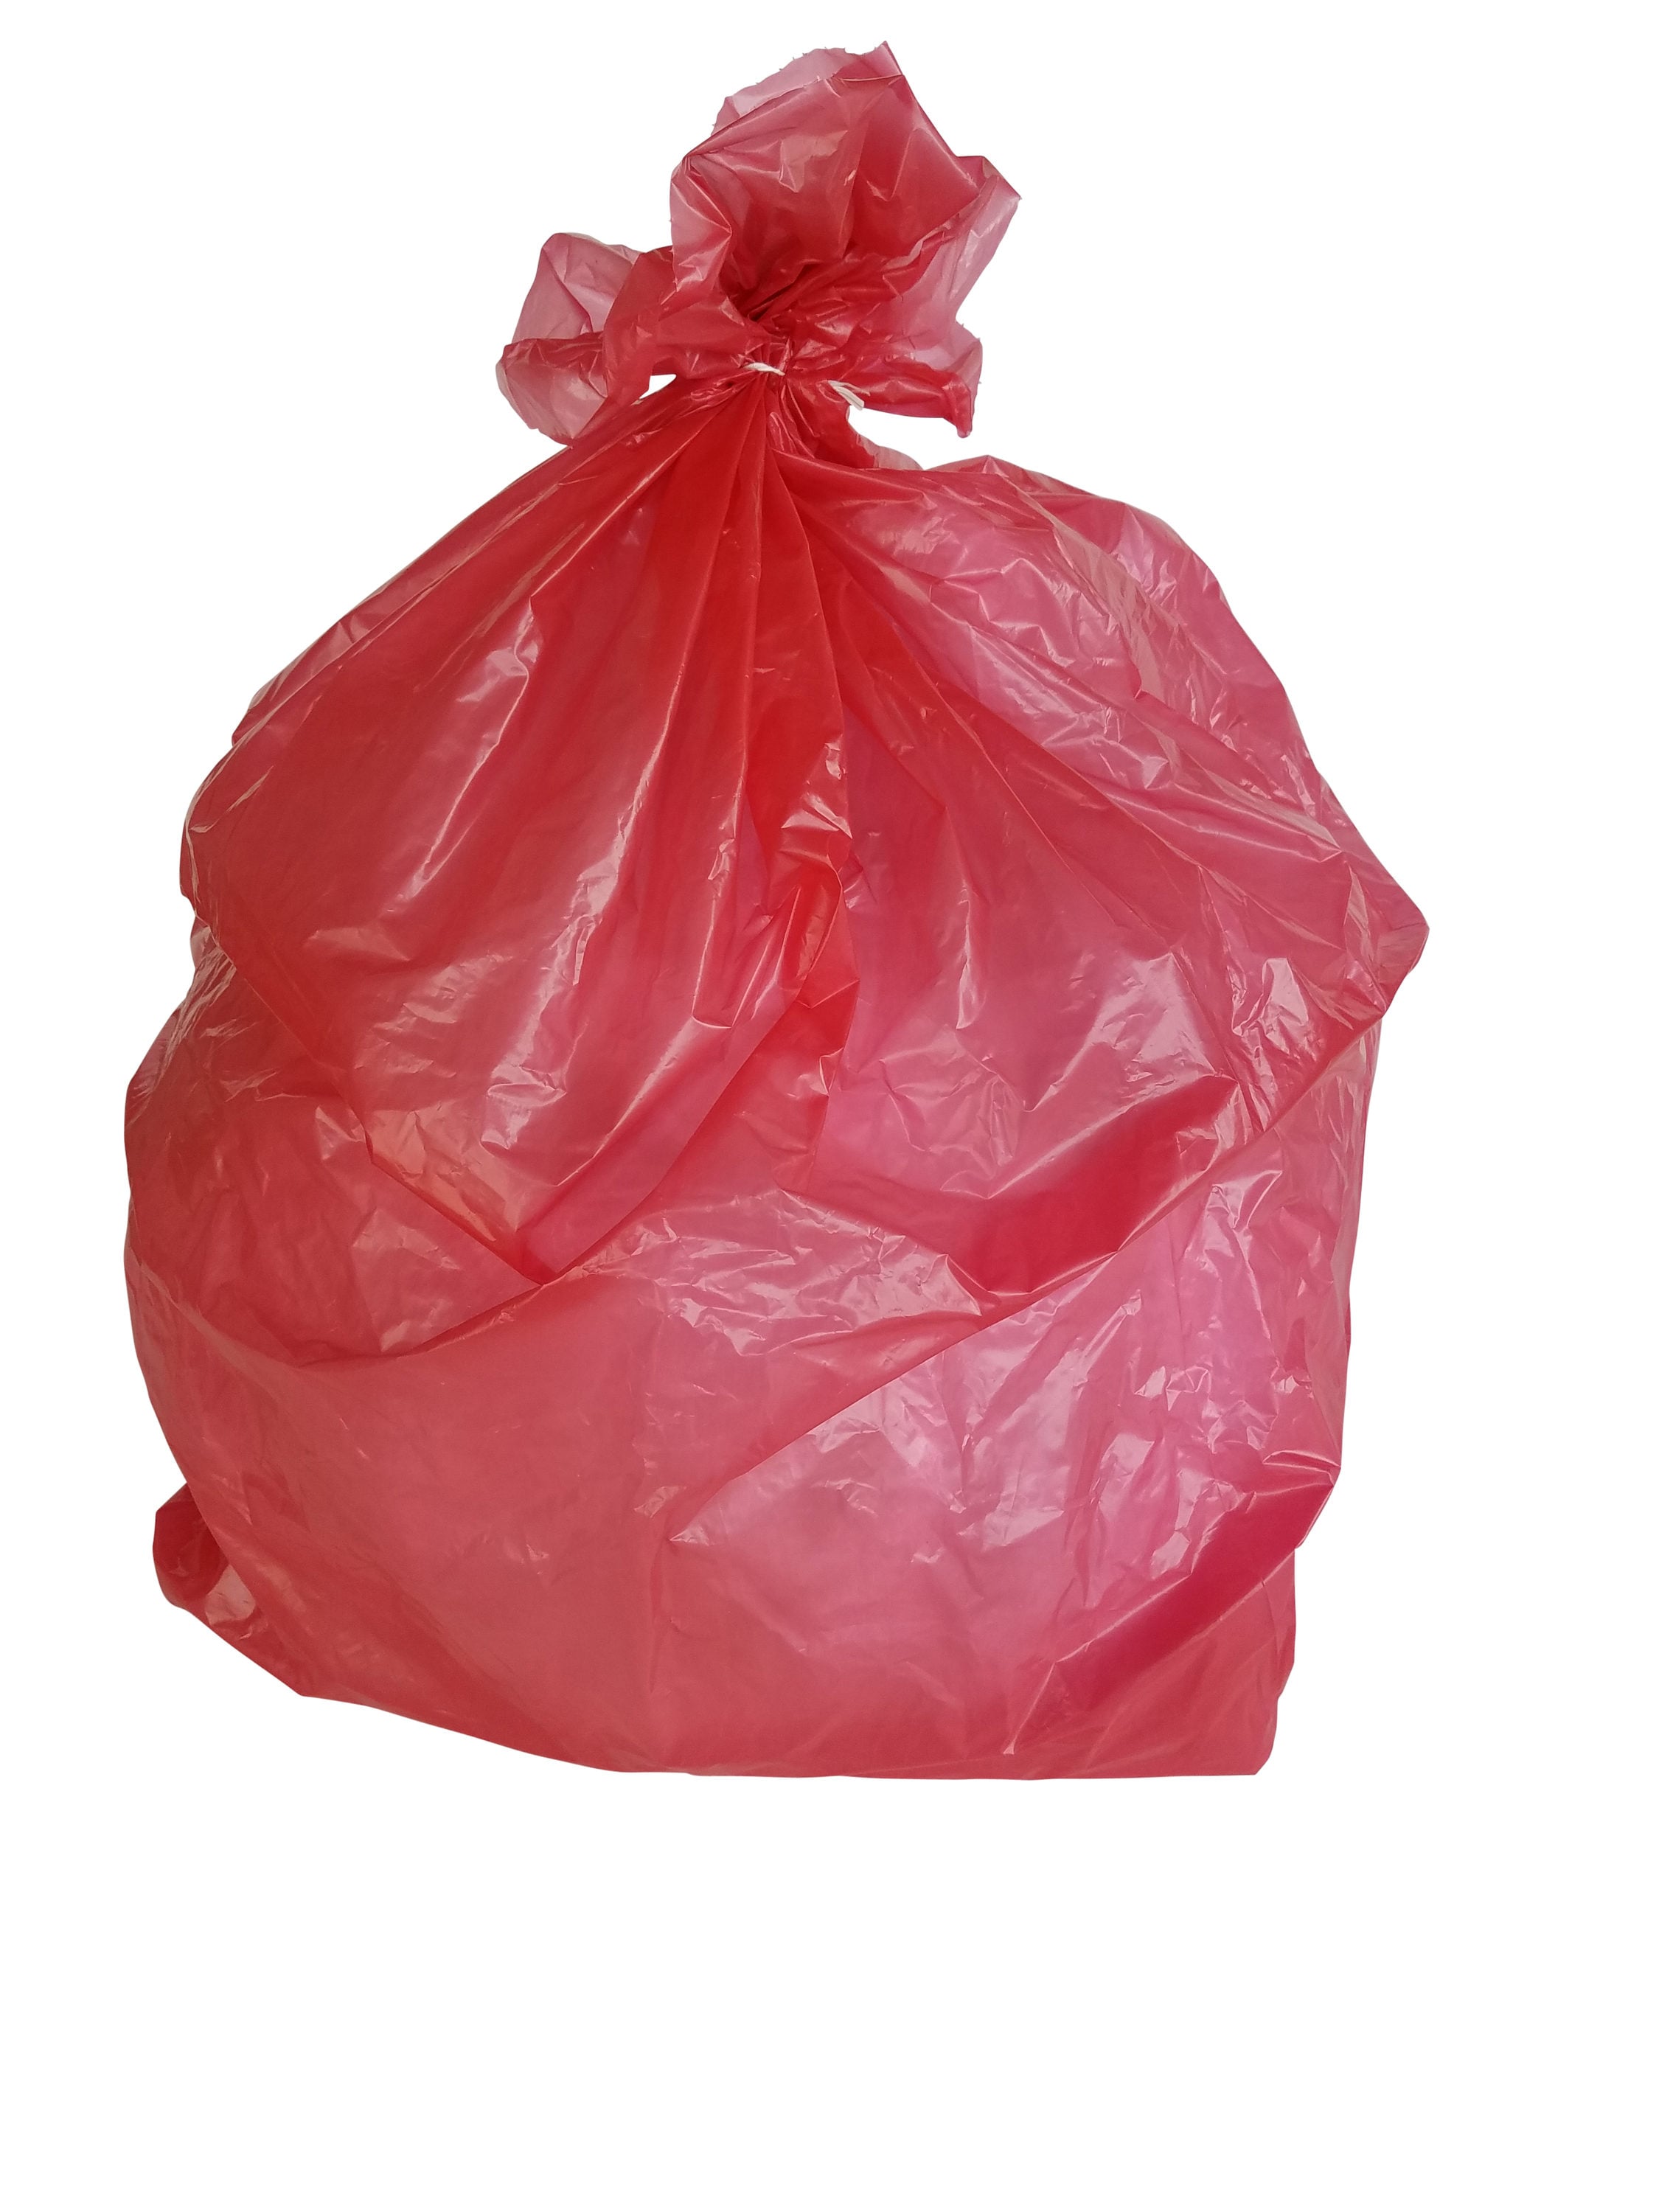 Durable Facilities Maintenance Quality Trash Bags (33 Gallon, RED) by Heath